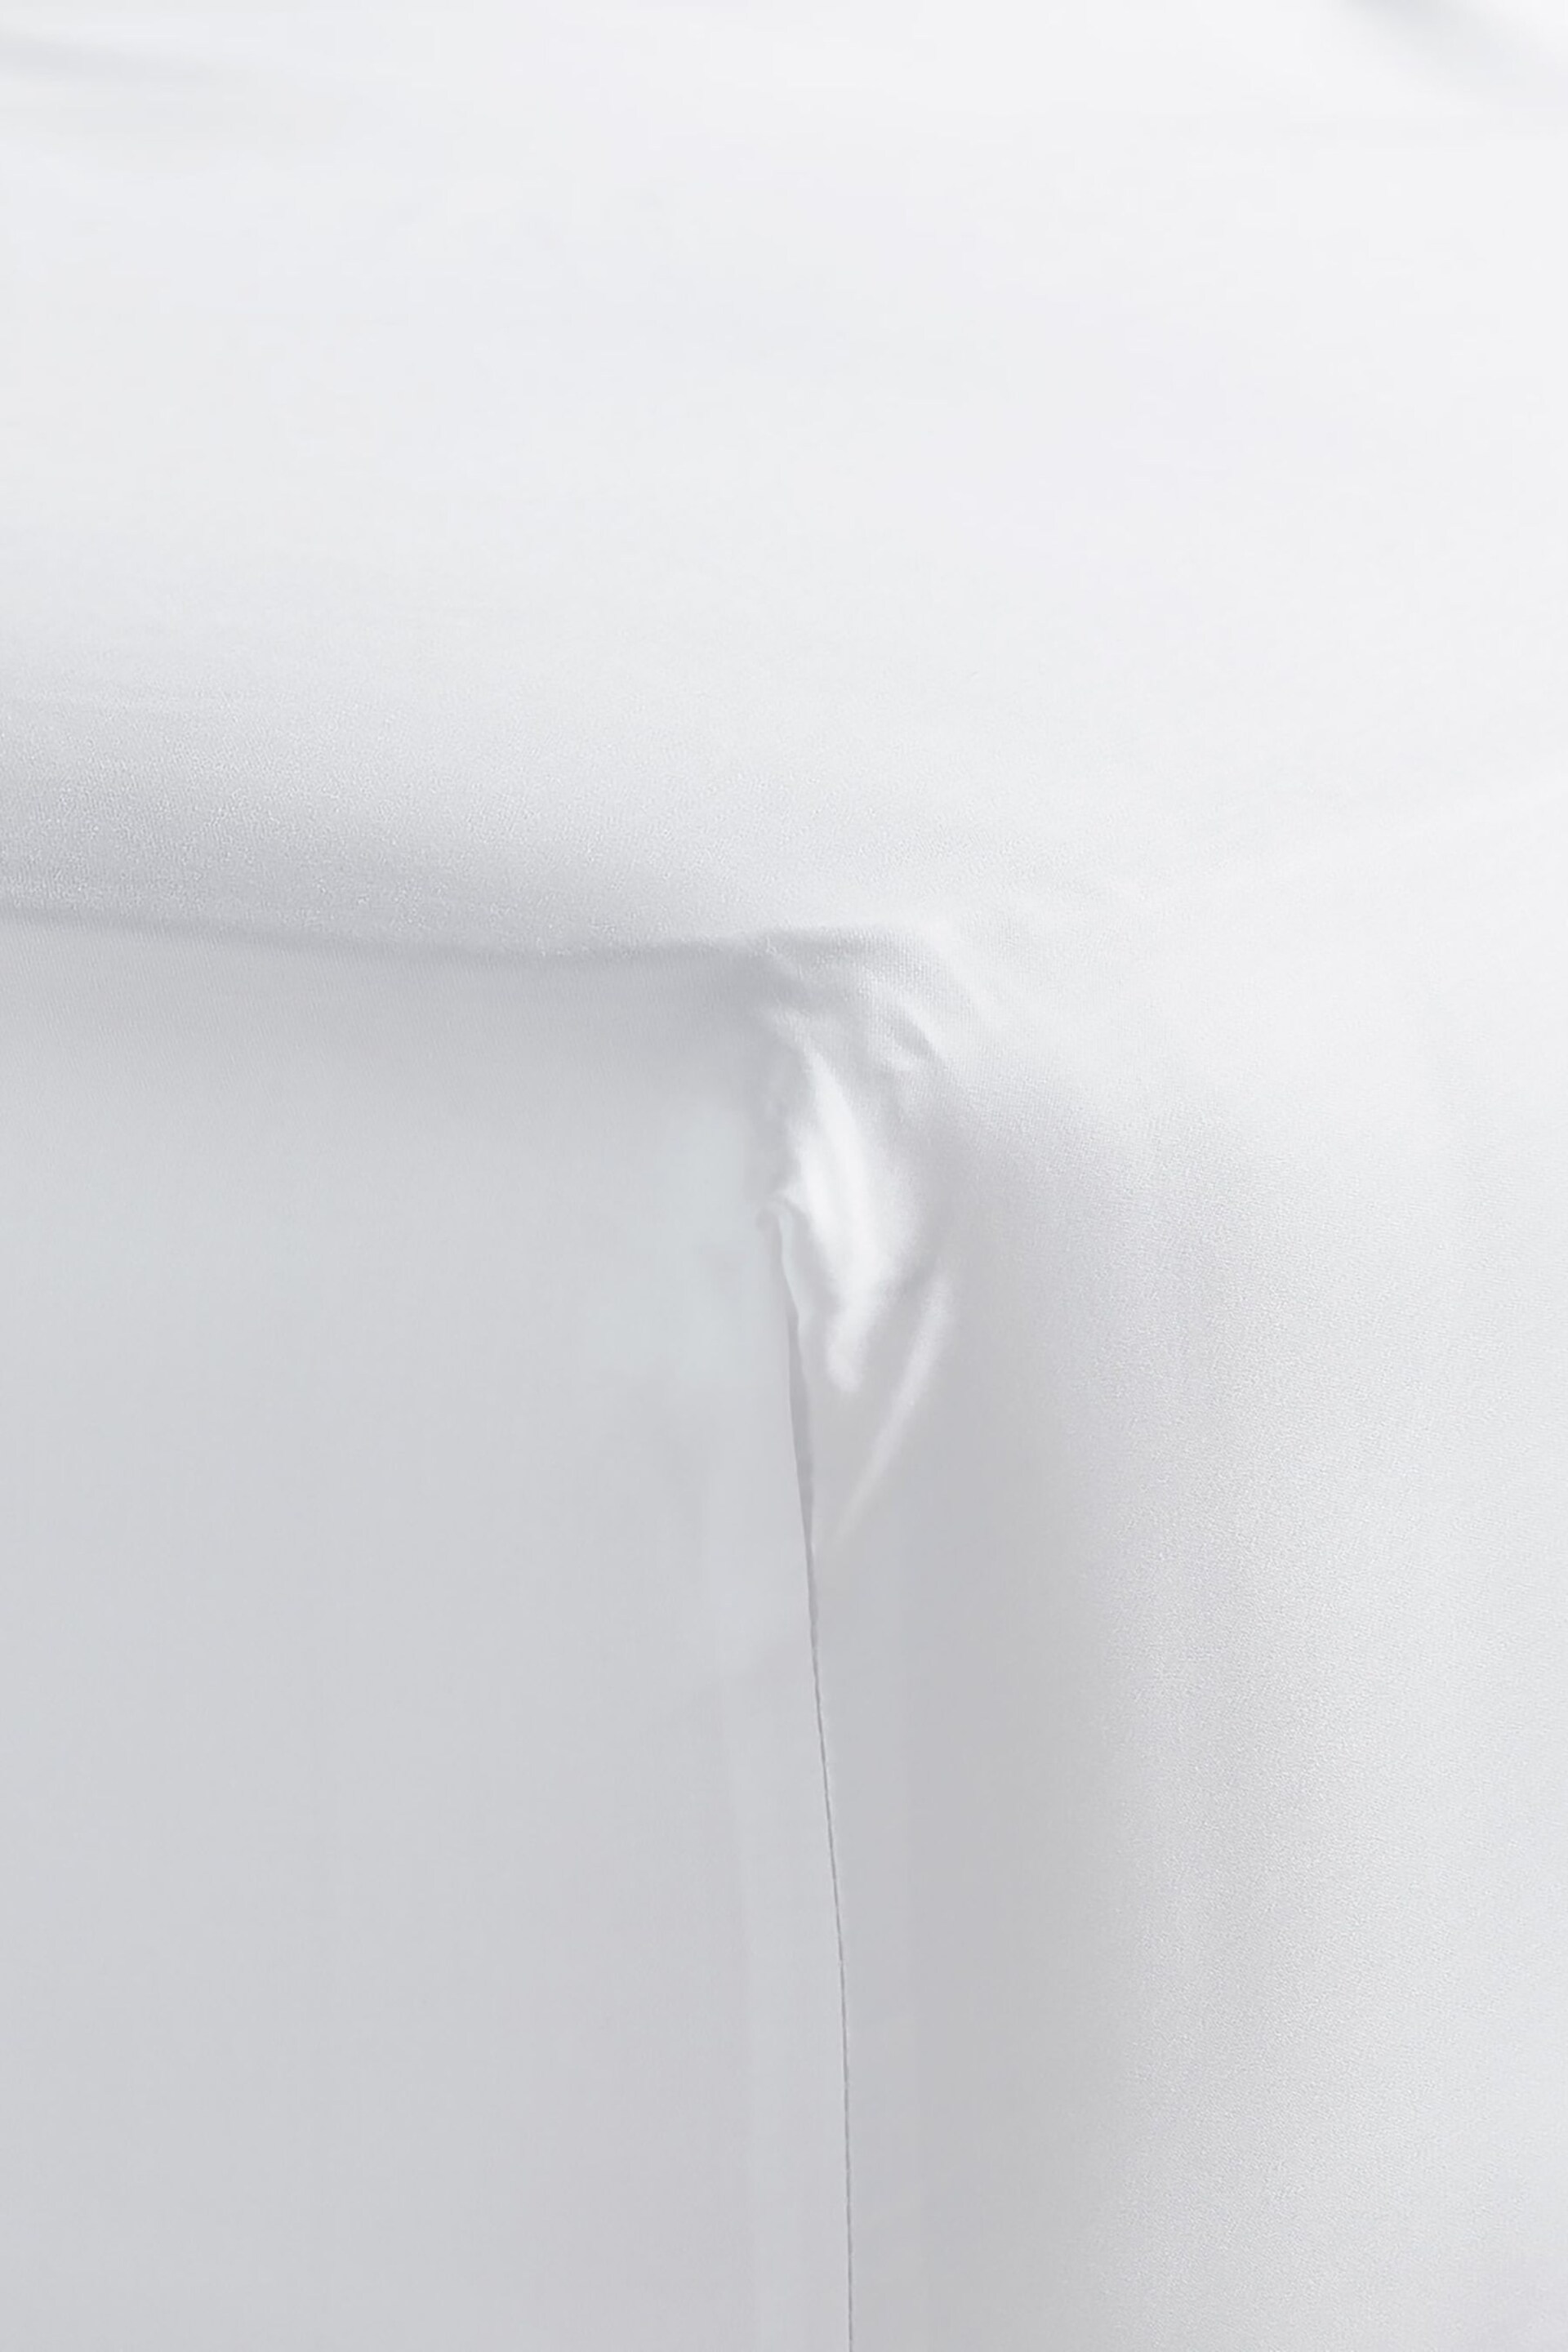 Bedfolk White Luxe Cotton Fitted Sheet - Image 1 of 4